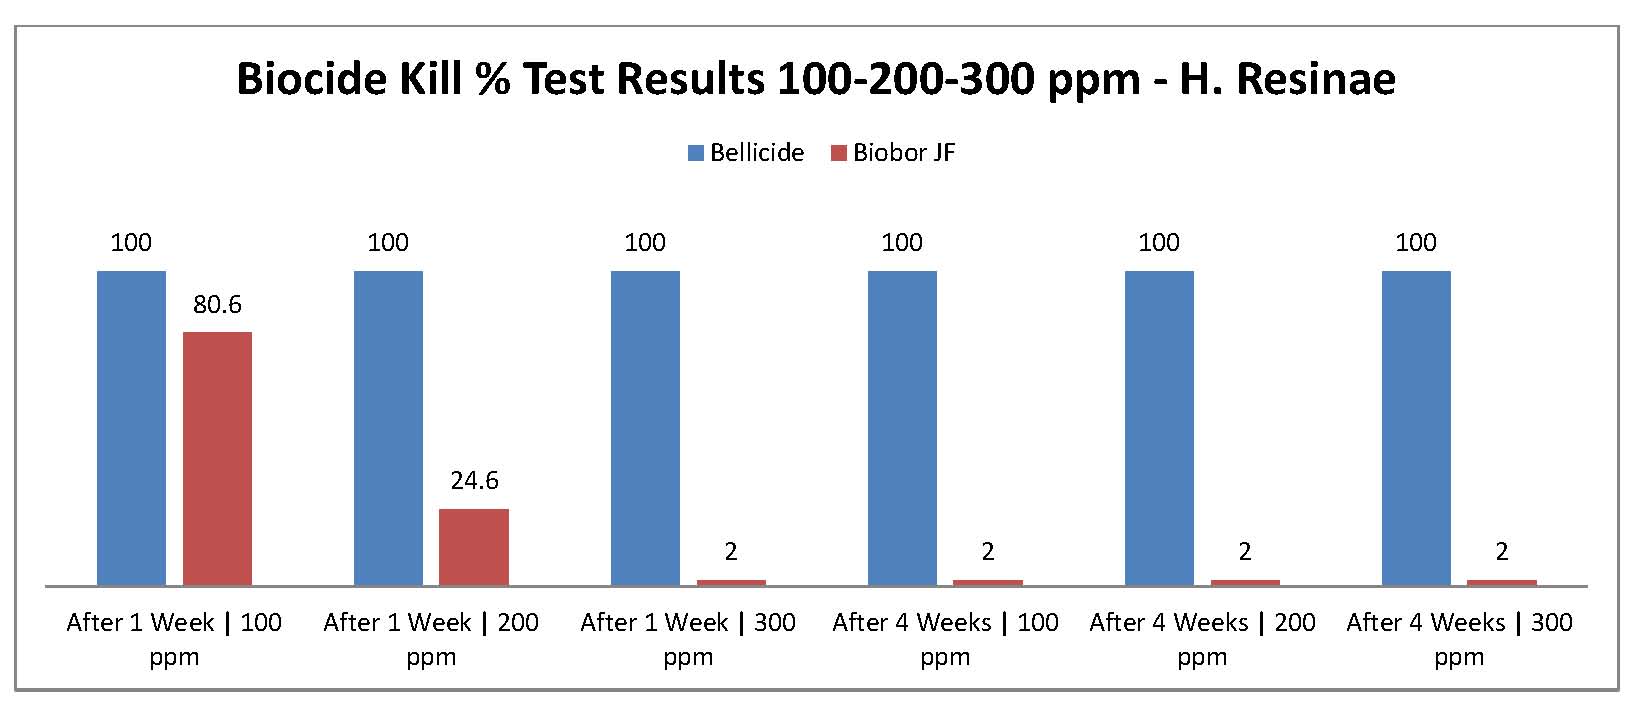 Choosing A Fuel Biocide For Your Farm: How Do Bellicide and Biobor Compare?